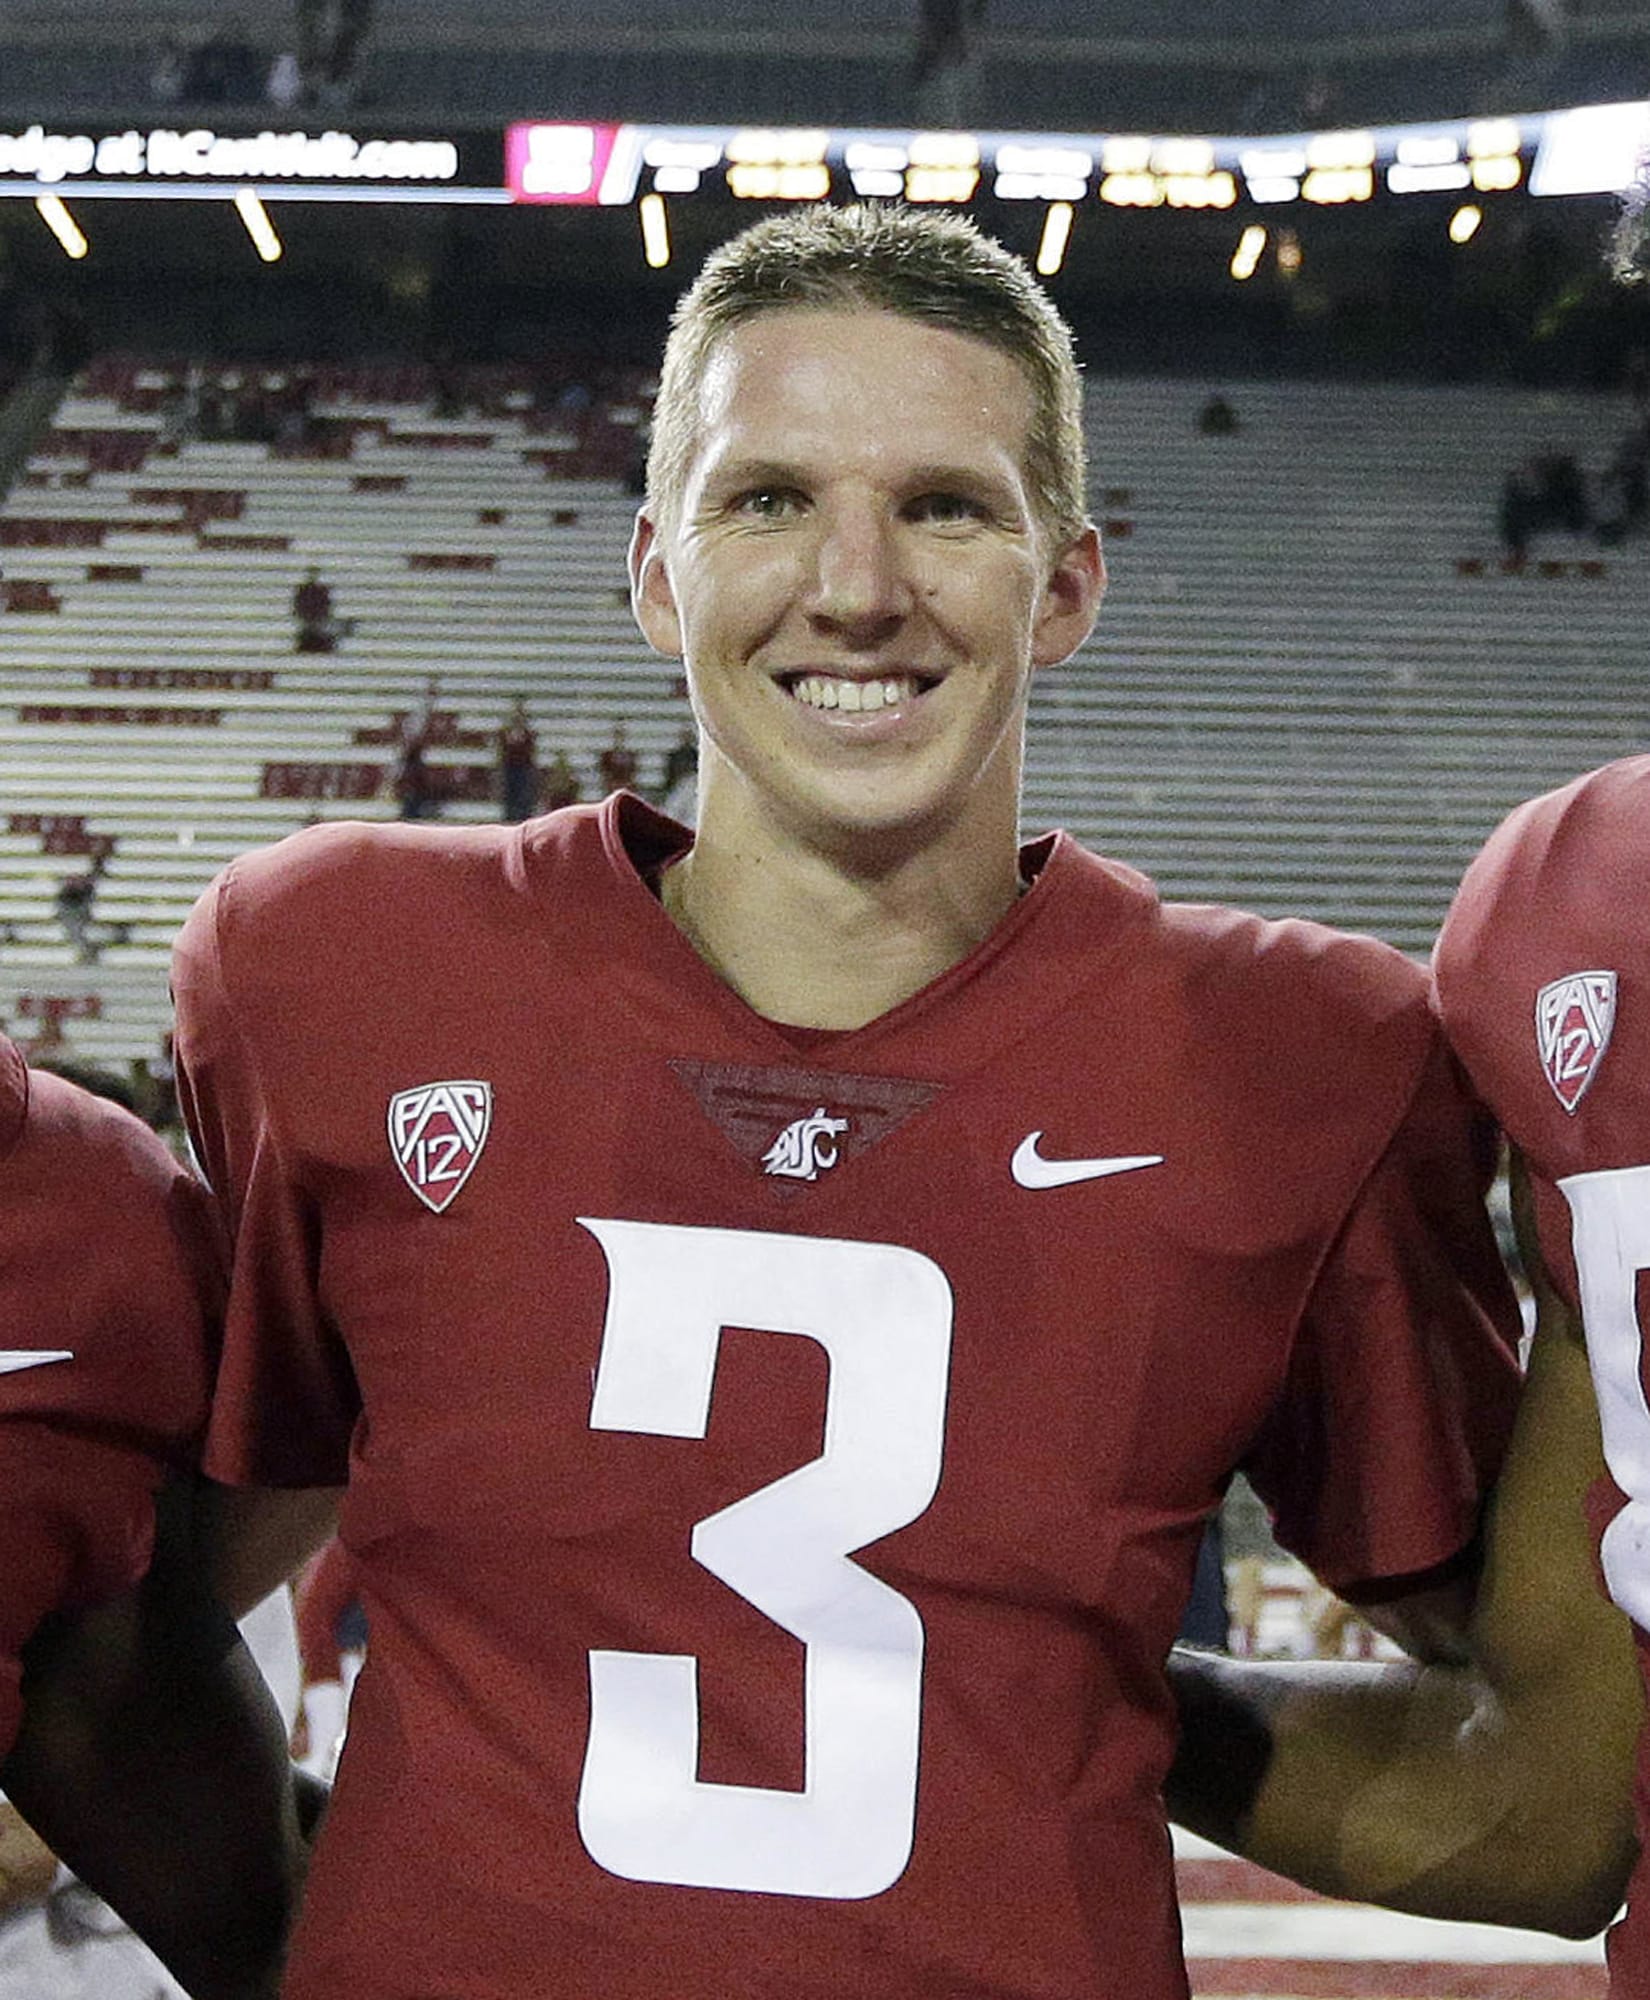 FILE - In this Sept. 9, 2017, file photo, Washington State quarterback Tyler Hilinski poses for a photo after an NCAA college football game against Boise State in Pullman, Wash. Hilinski has died from an apparent self-inflicted gunshot wound. The 21-year-old Hilinski was discovered in his apartment after he didn't show up for practice Tuesday, Jan. 16, 2018.